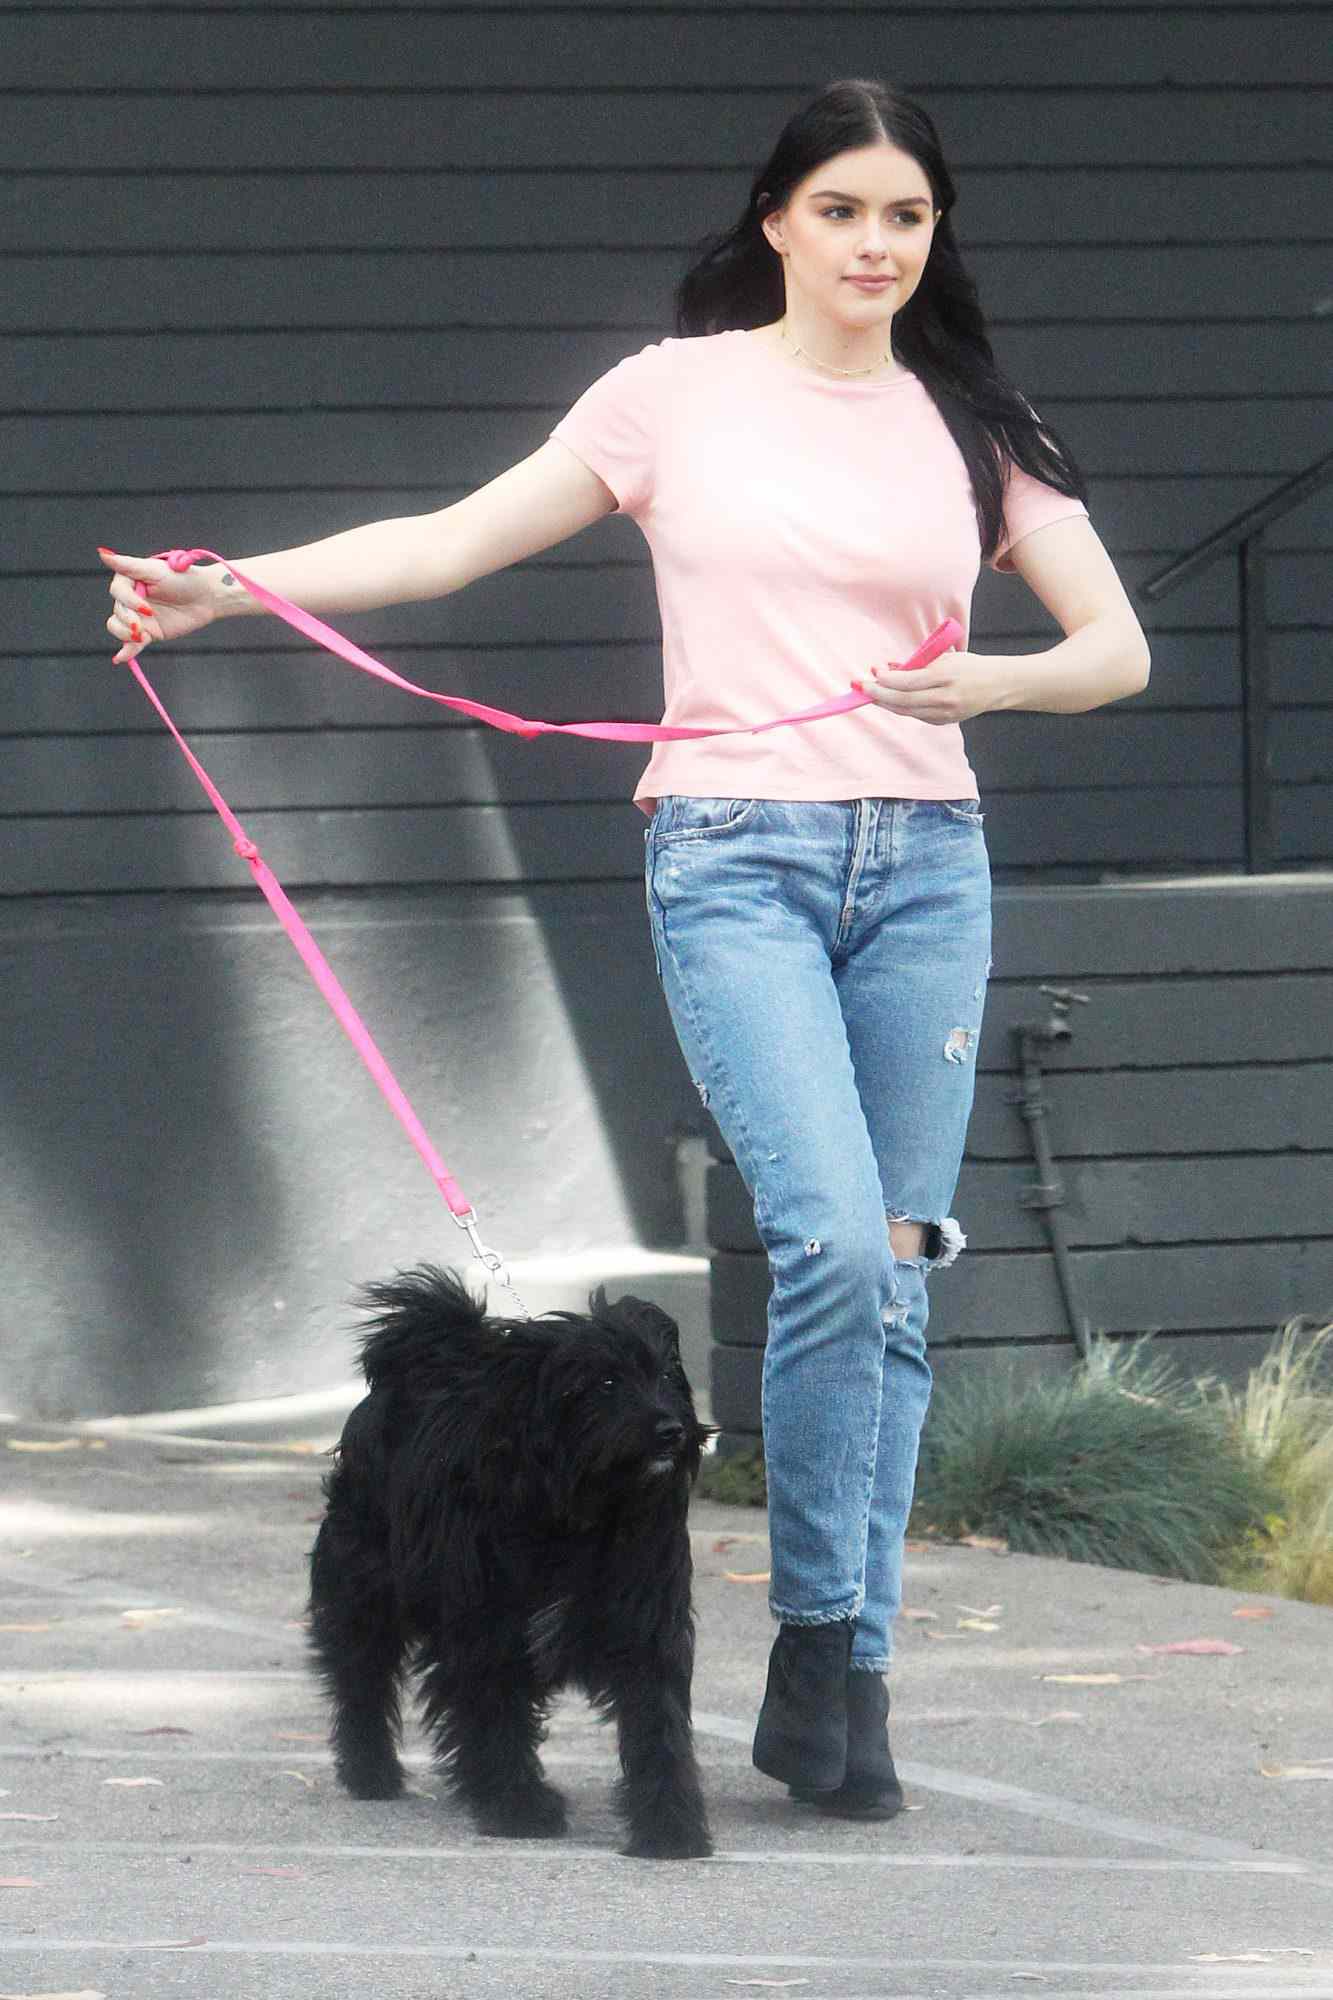 EXCLUSIVE: Ariel Winter takes a cute pooch for a walk during a break from filming in Los Angeles